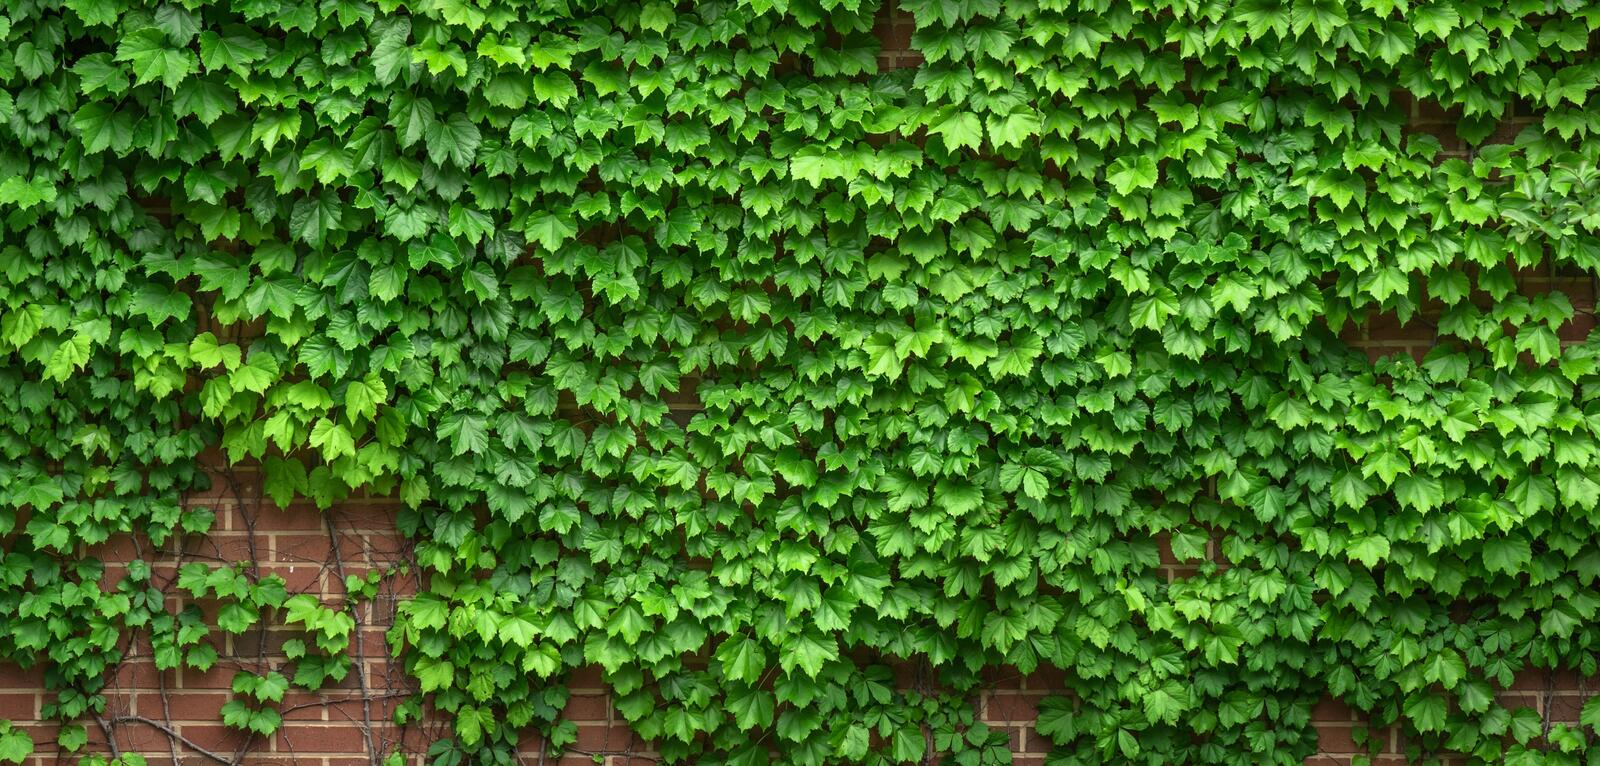 Free photo A shrub growing on the brick wall of a building